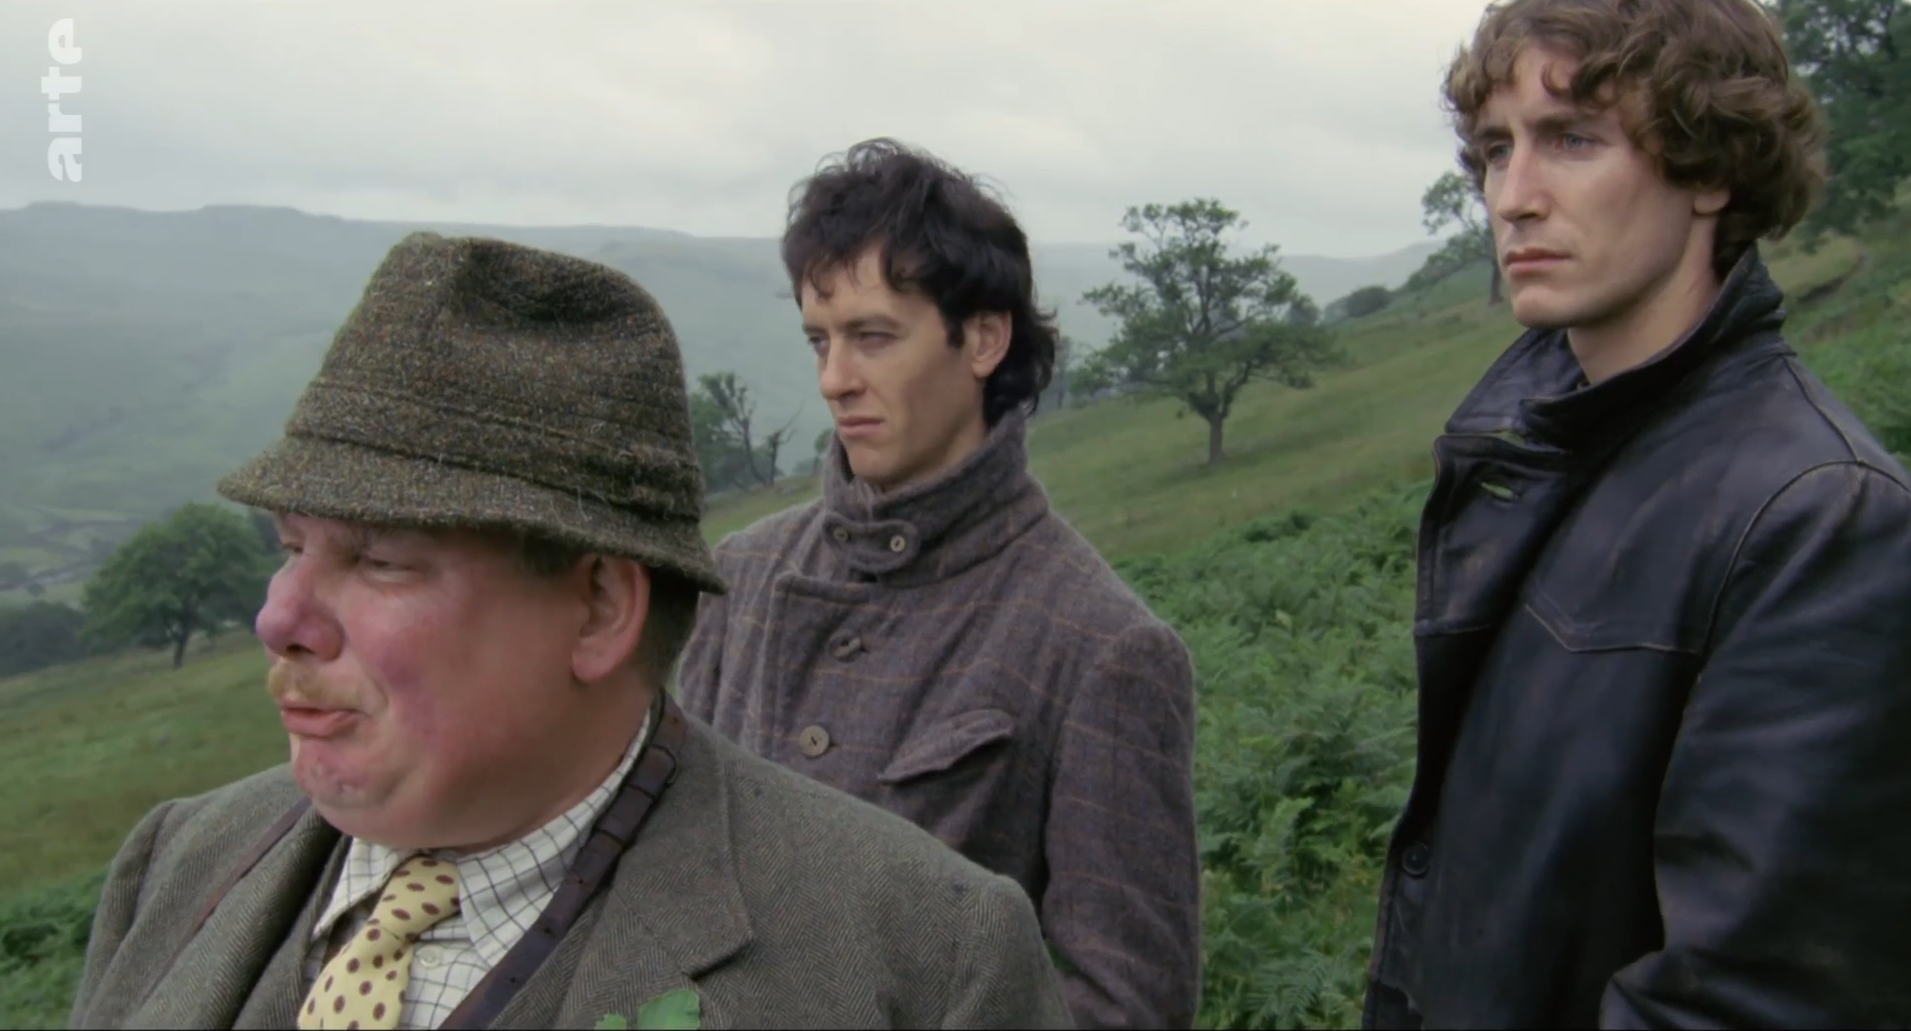 Withnail and I (1987): Death of a Friendship